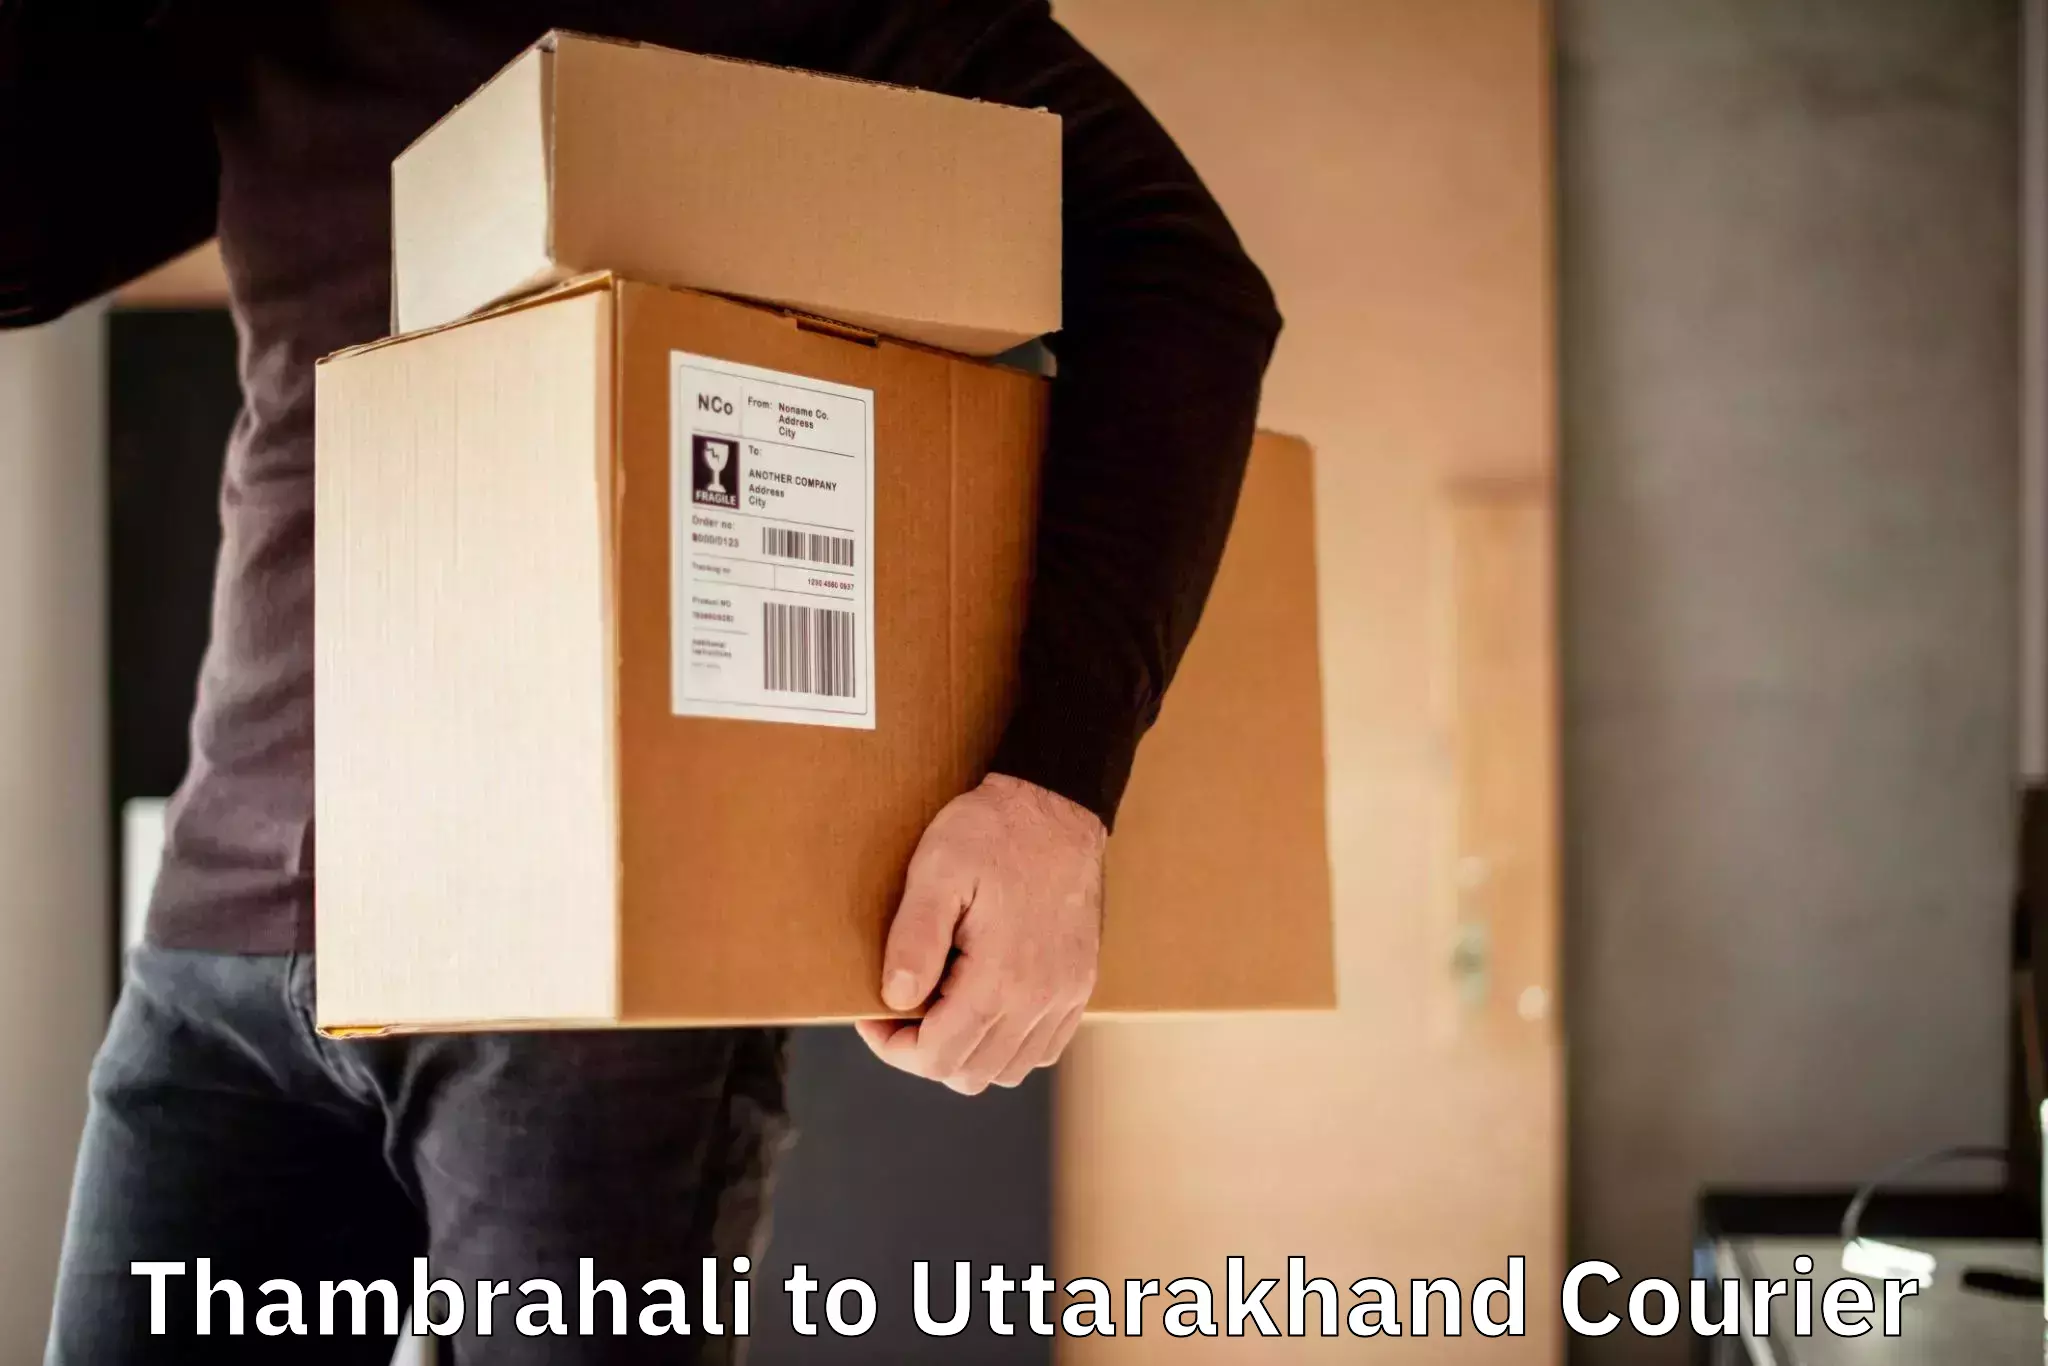 On-call courier service Thambrahali to Lansdowne